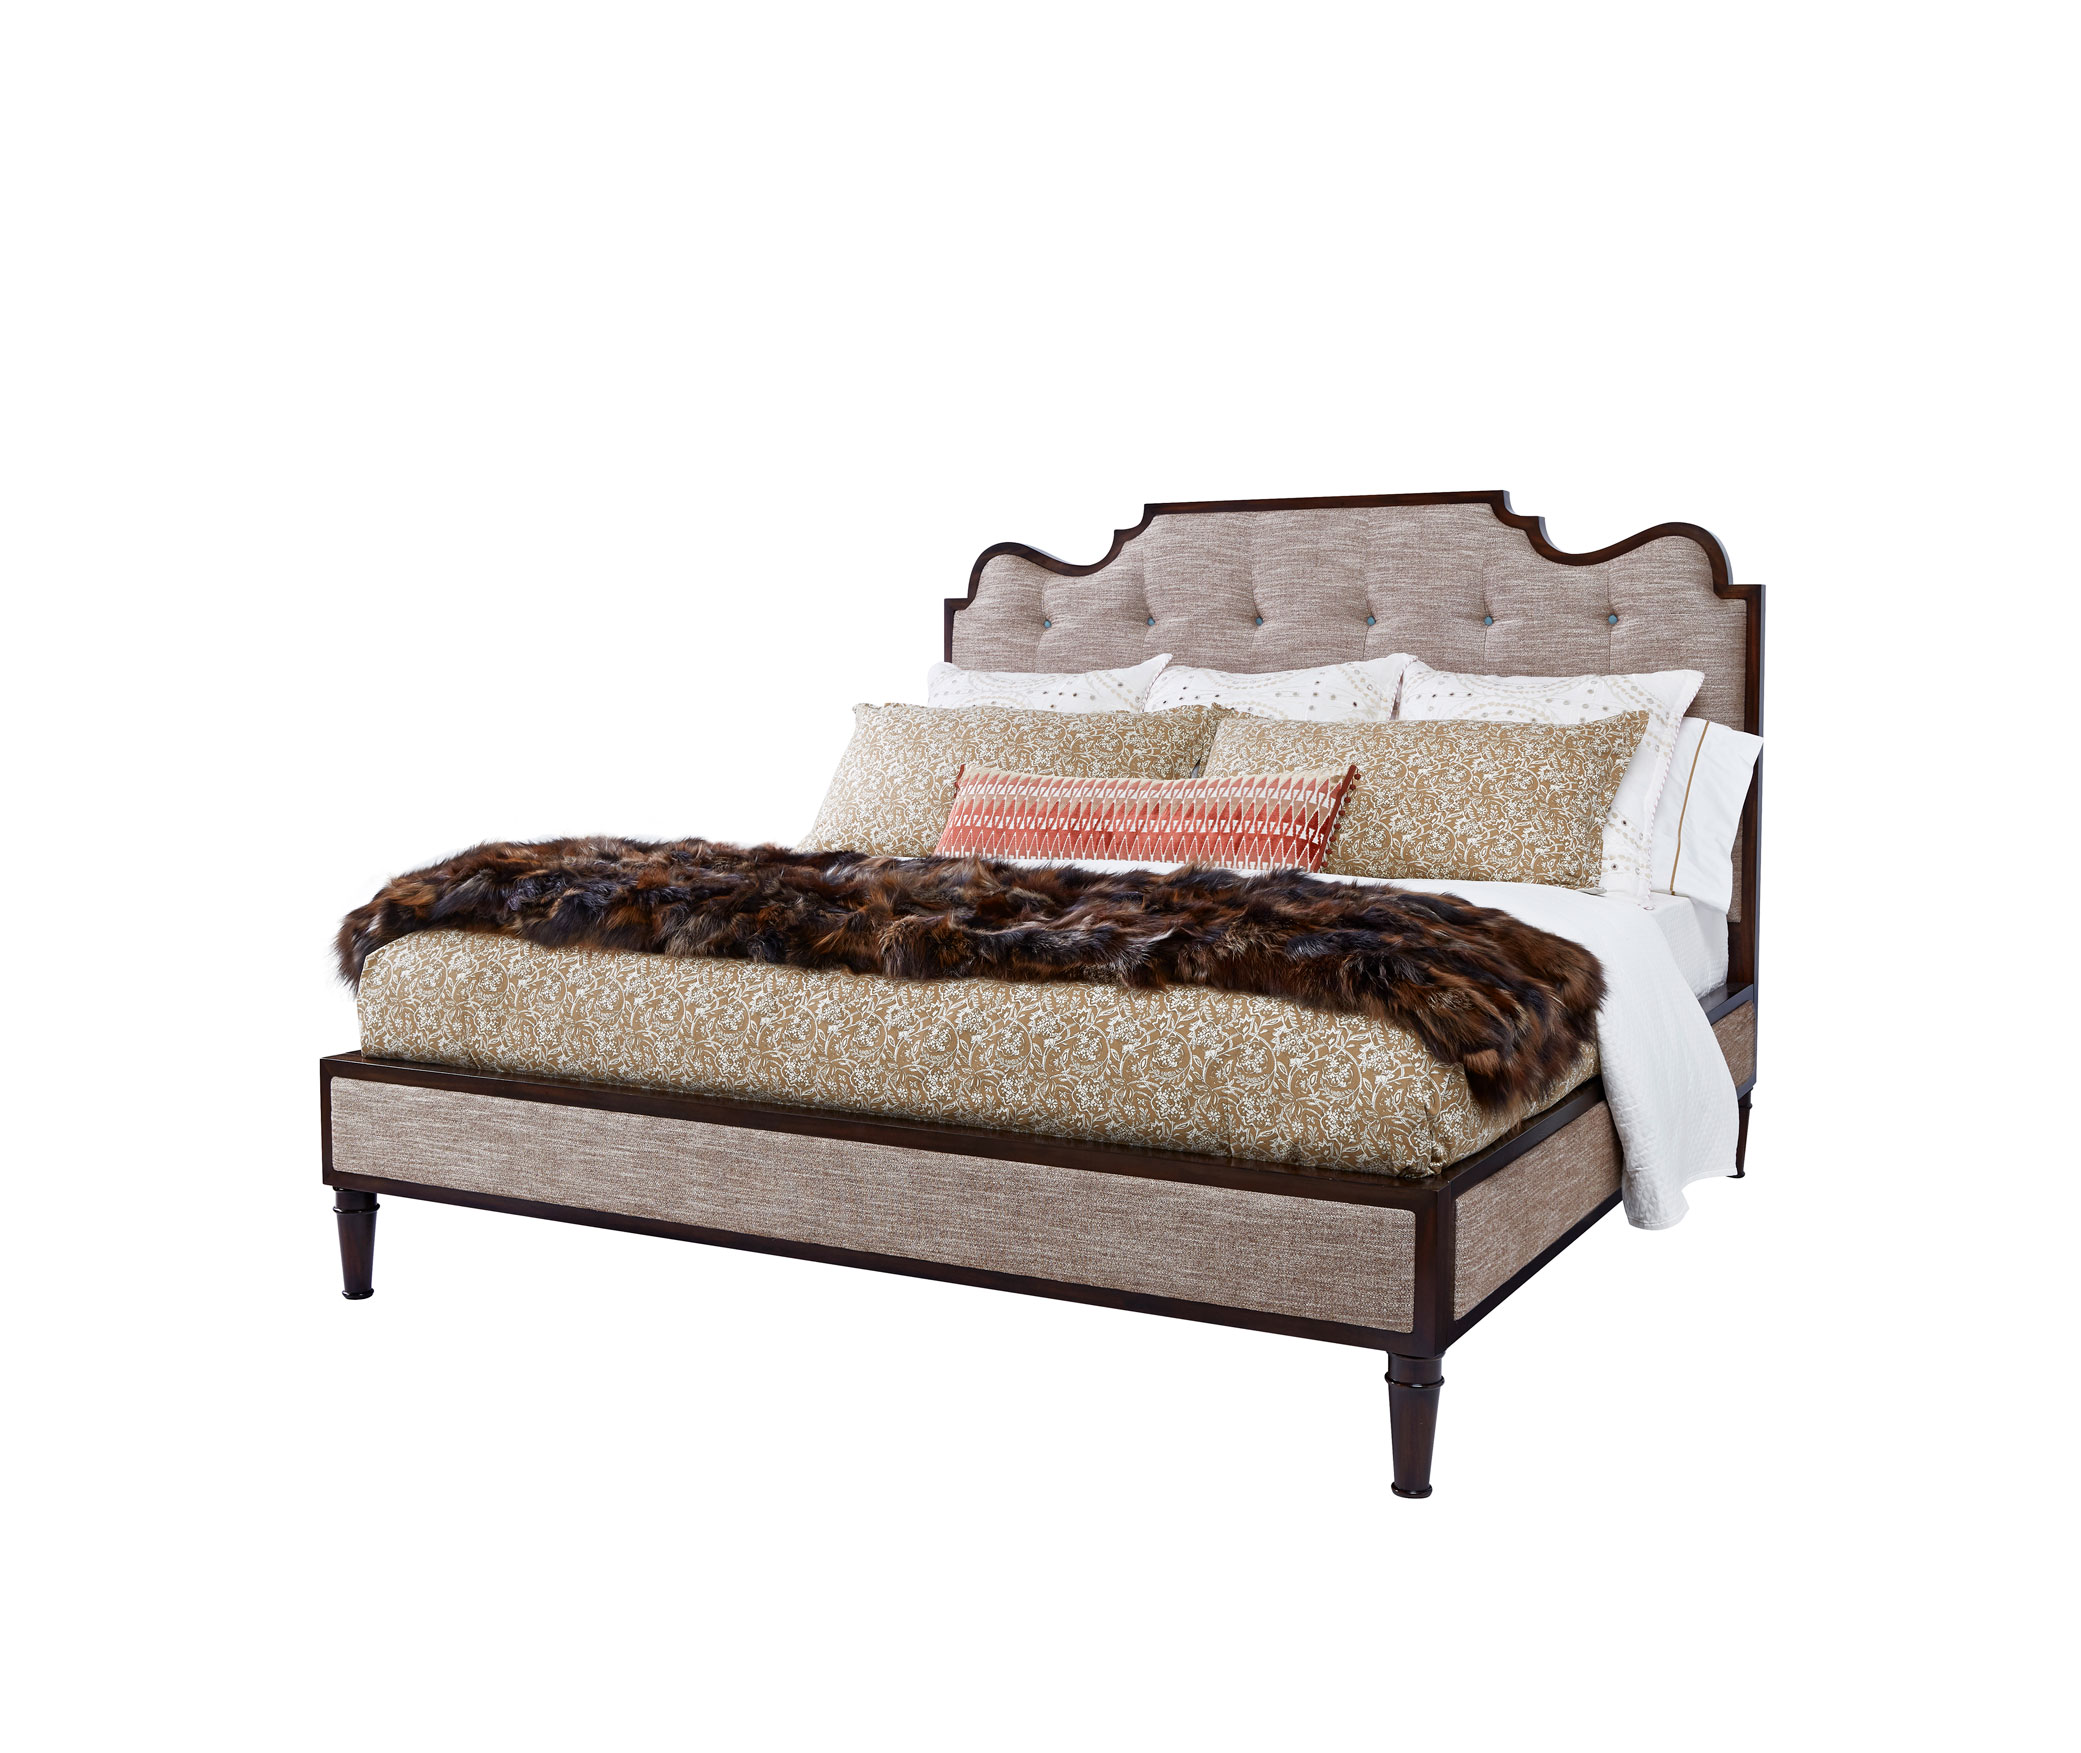 Theodore-Alexander_Ava-Bed_int_product